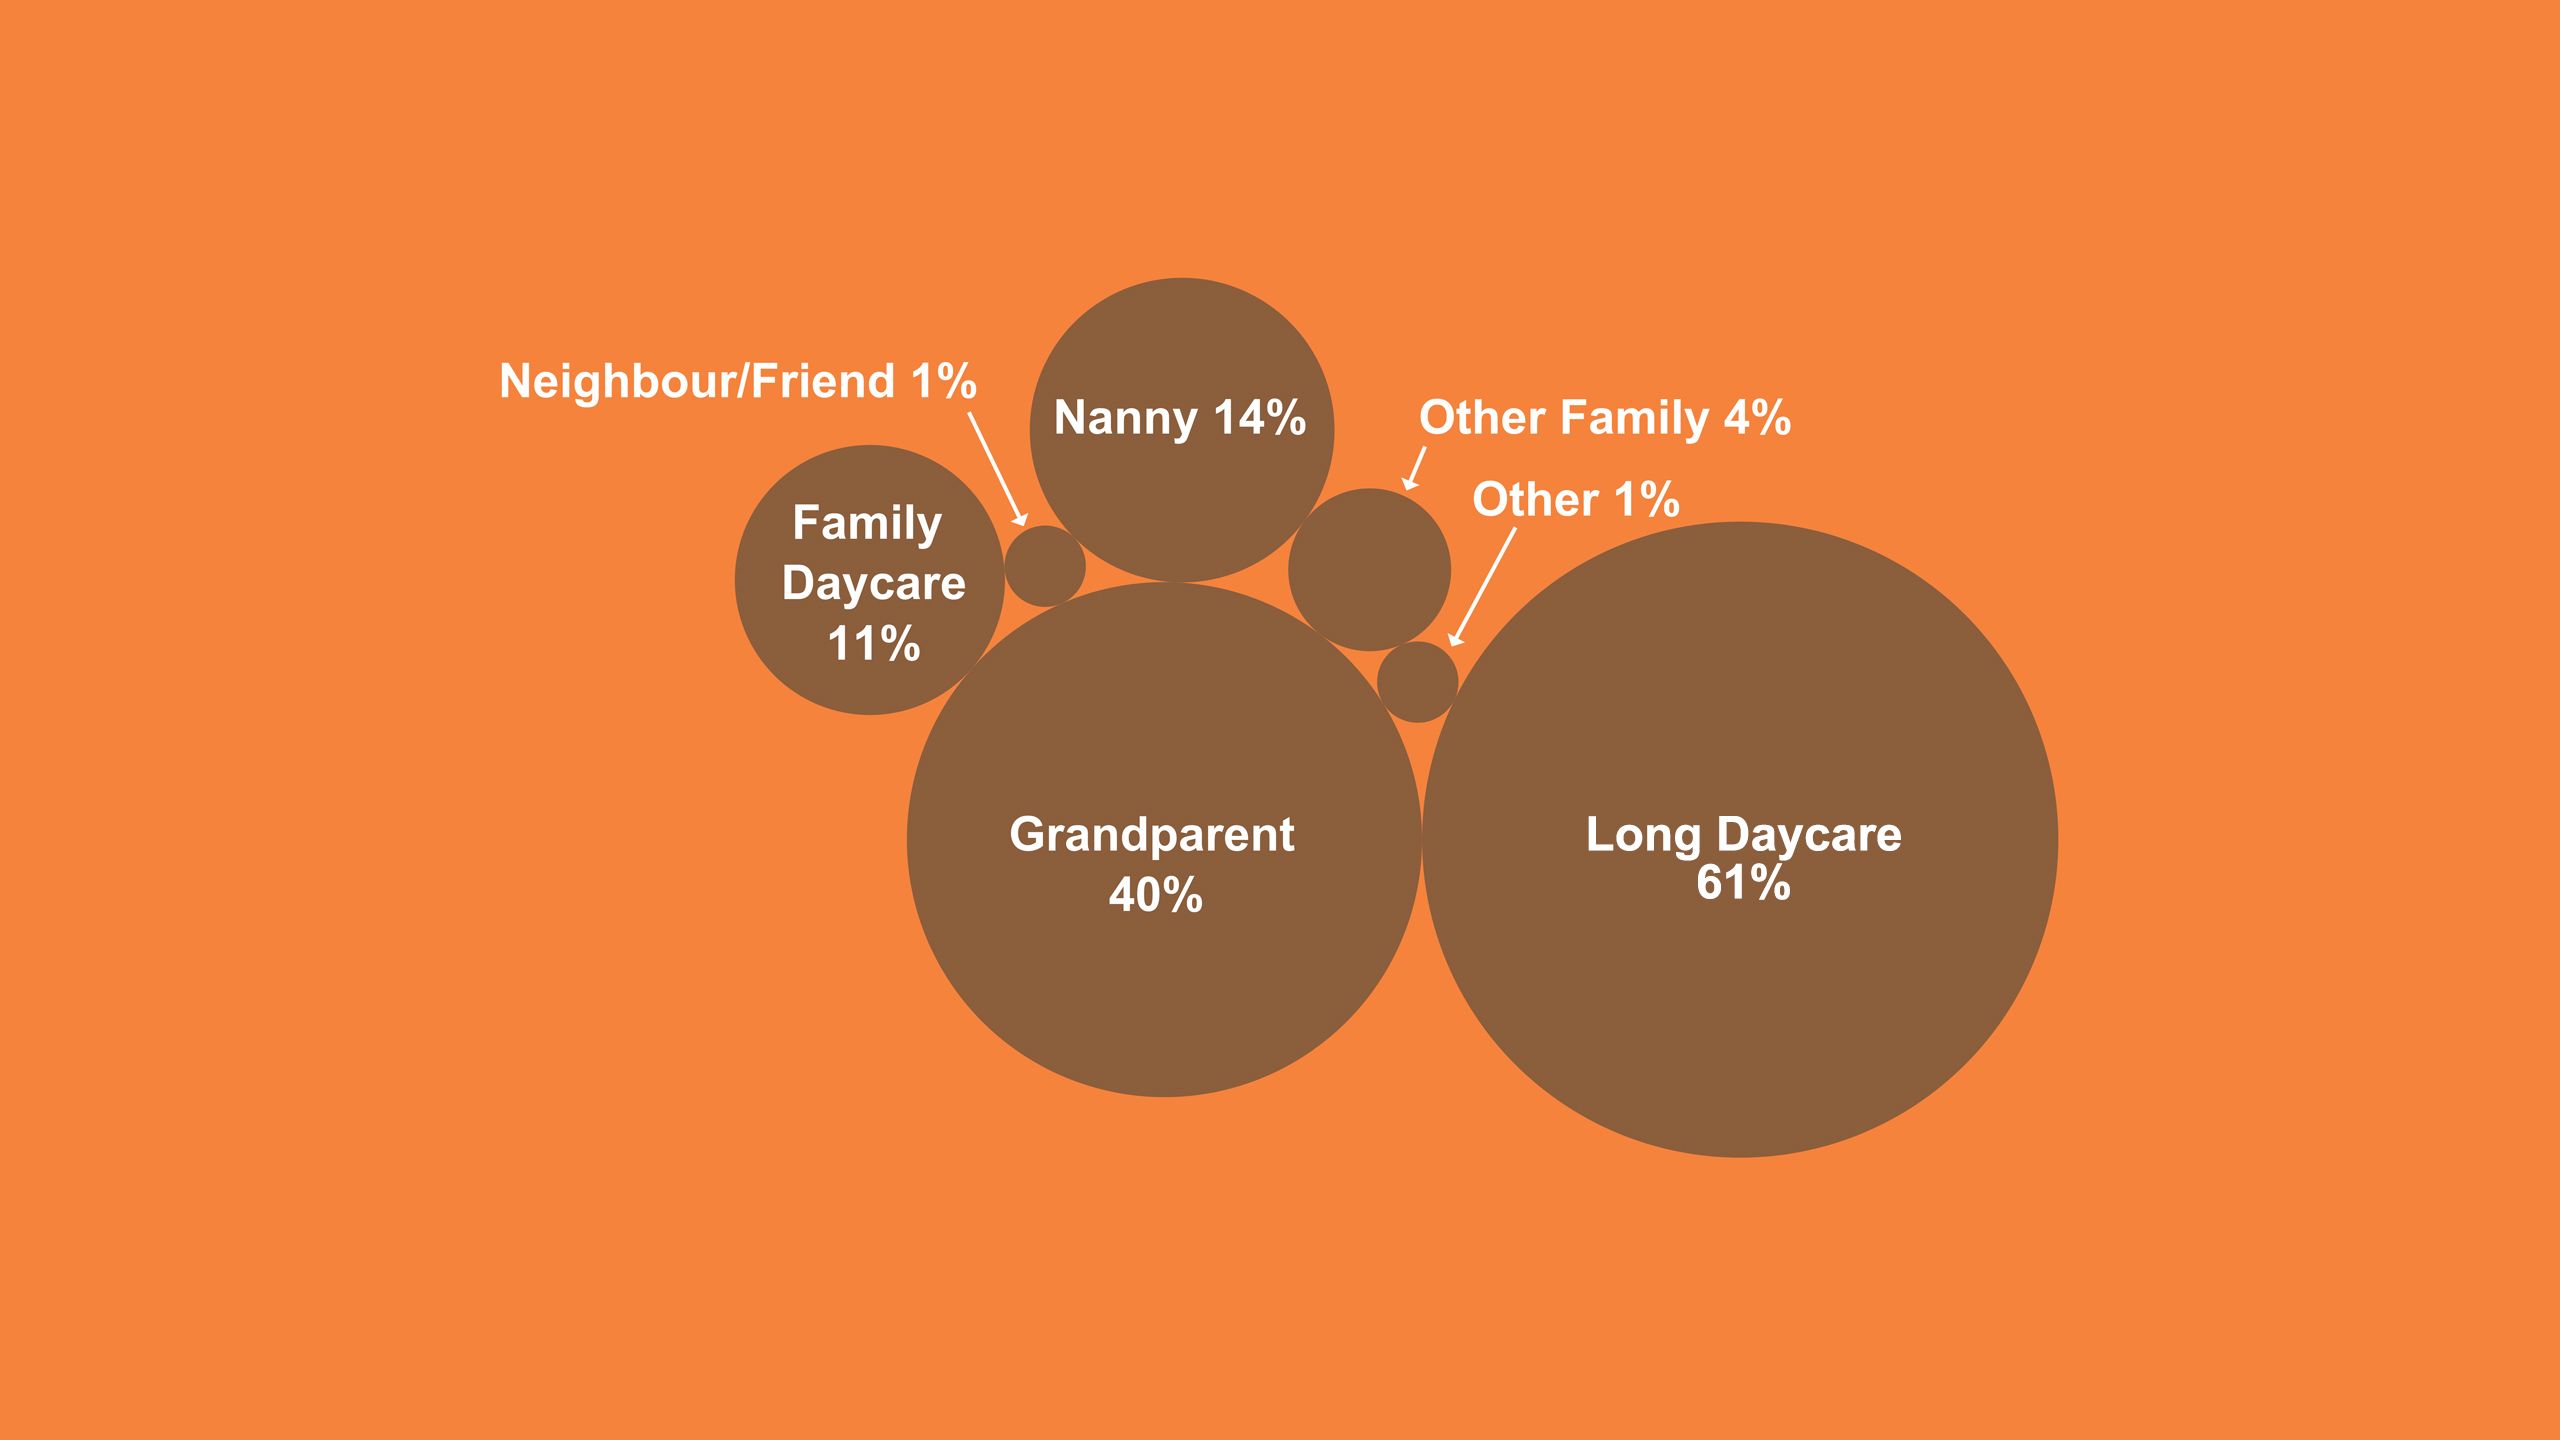 Long day care - 61%, grandparents 40%, nanny 14%, family day care 11%, other family 4%, Neighbour/Friend 1%, Other 1%